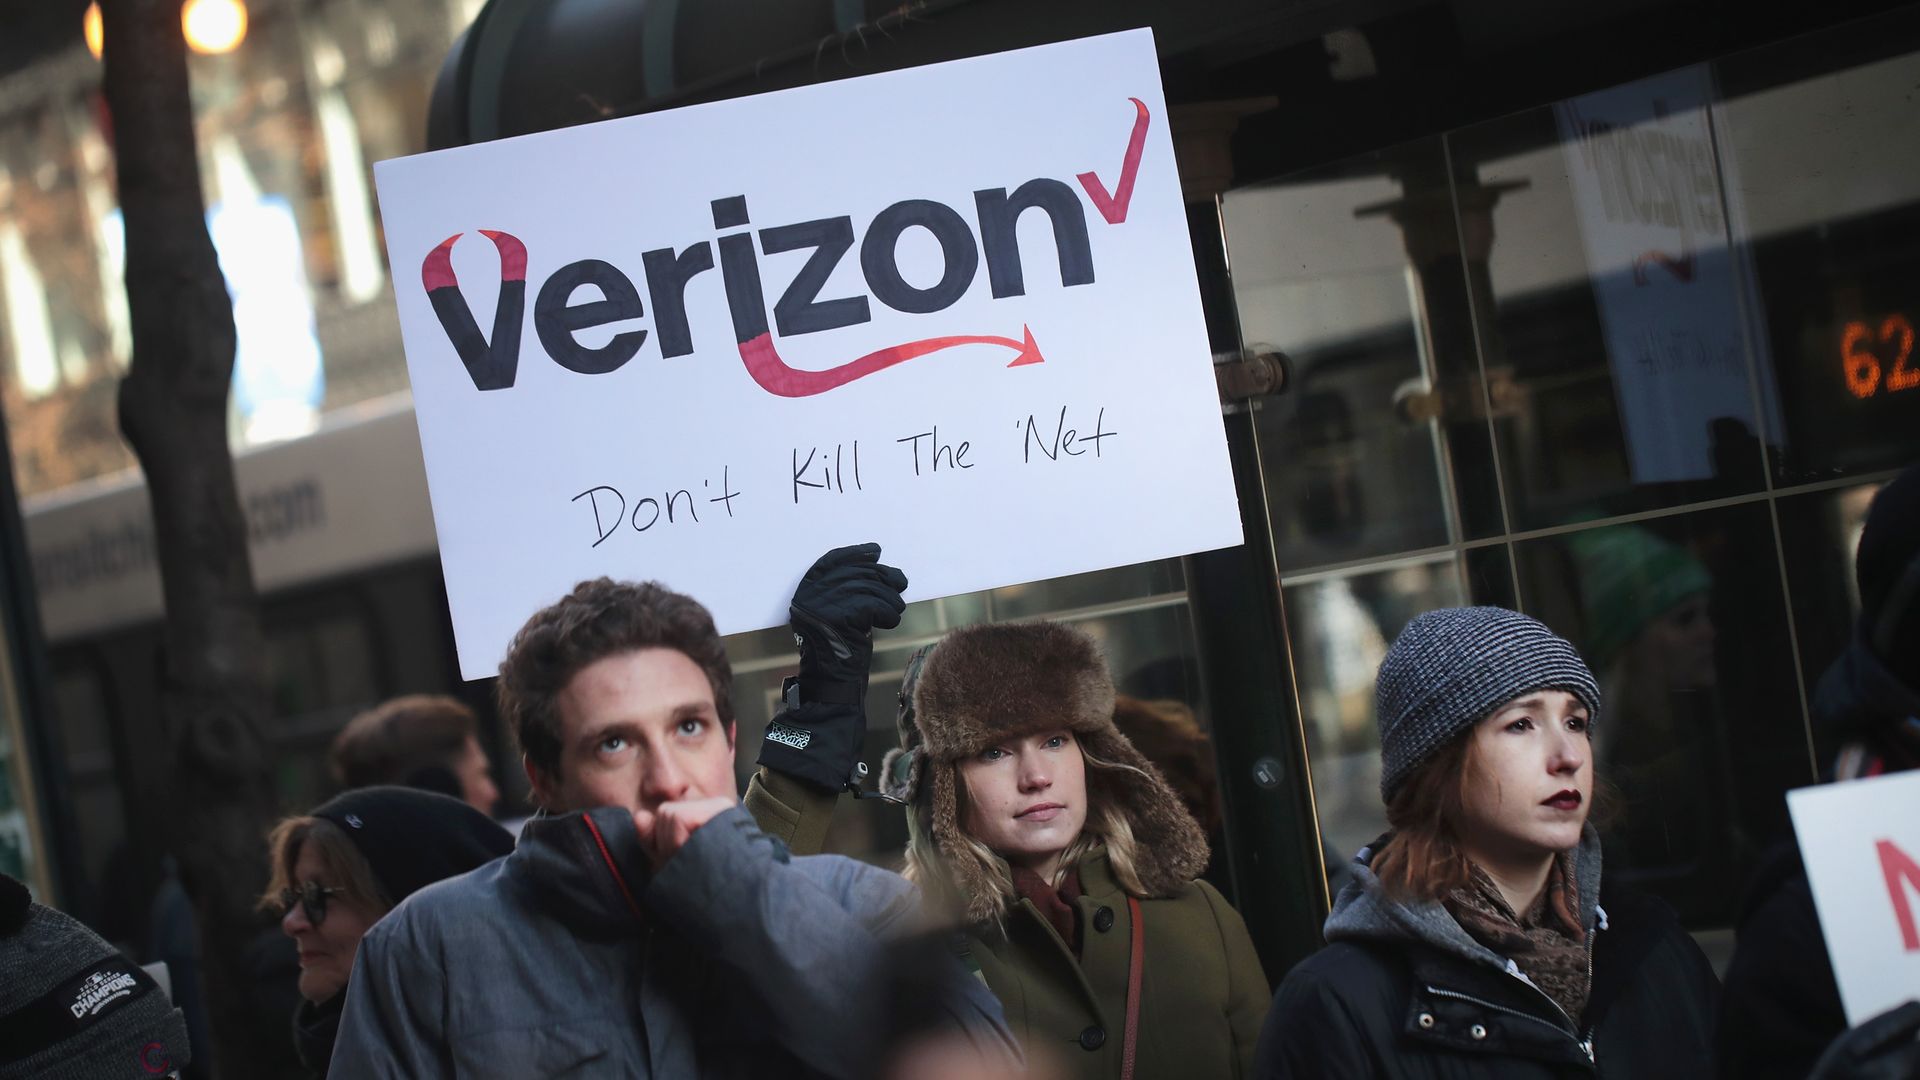 Demonstrators, supporting net neutrality, protest a plan by the FCC to repeal restrictions on internet service providers